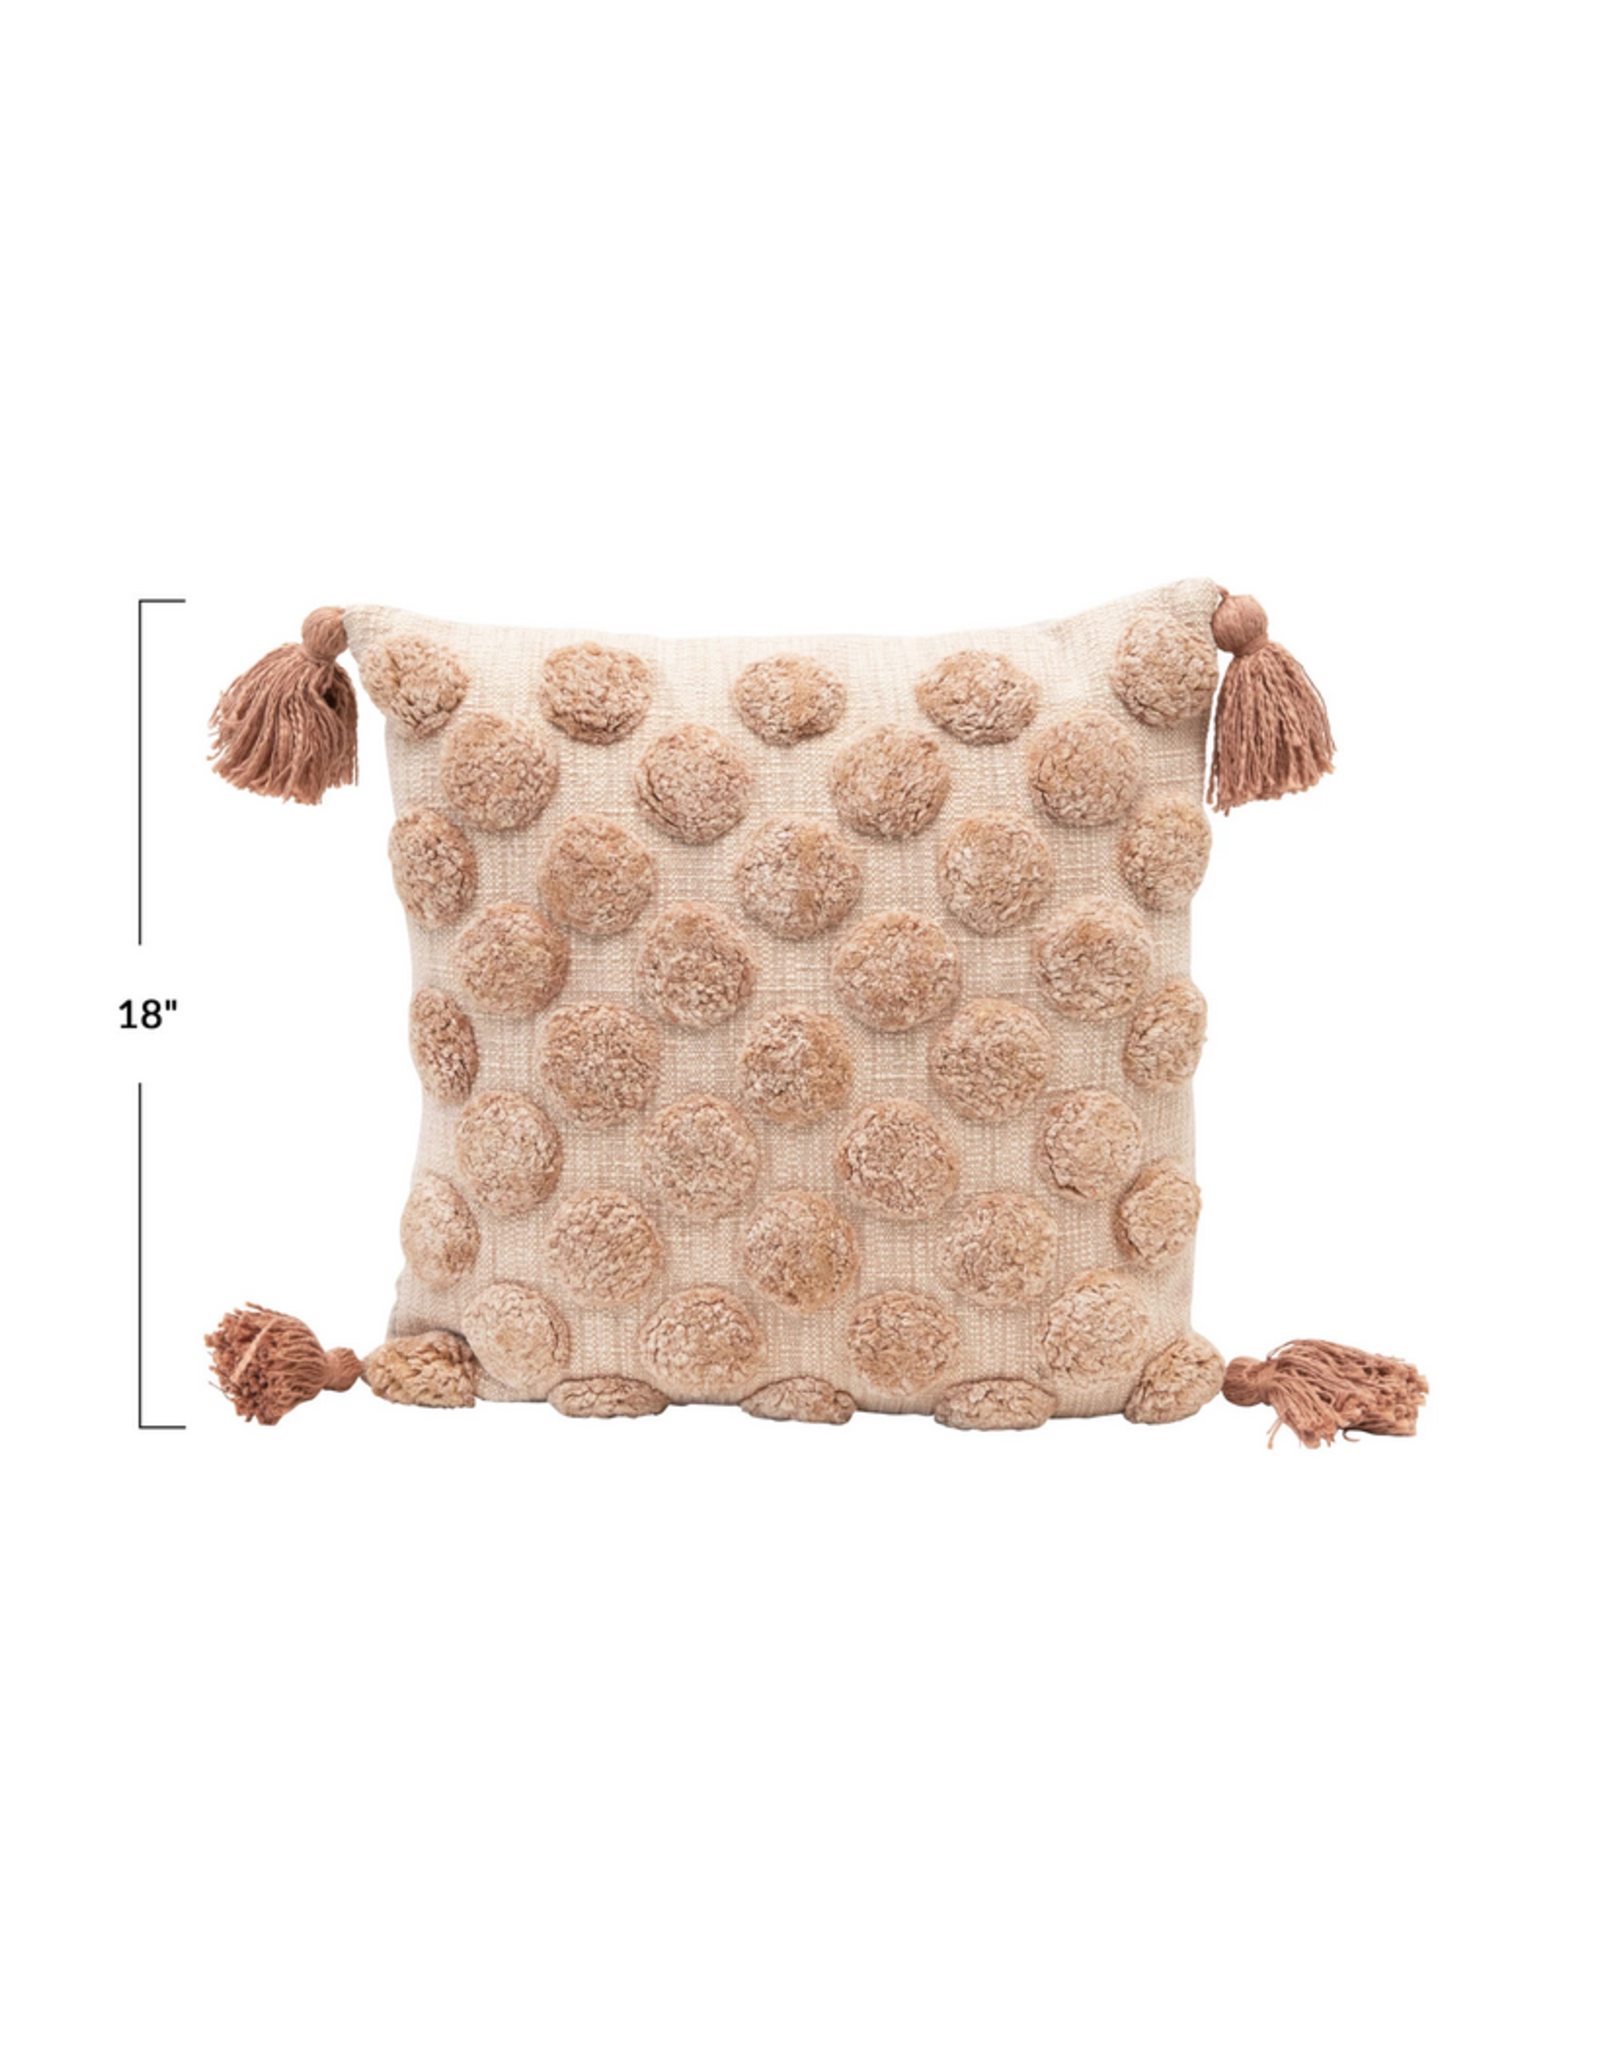 Tufted Blush Pillow with Tassels